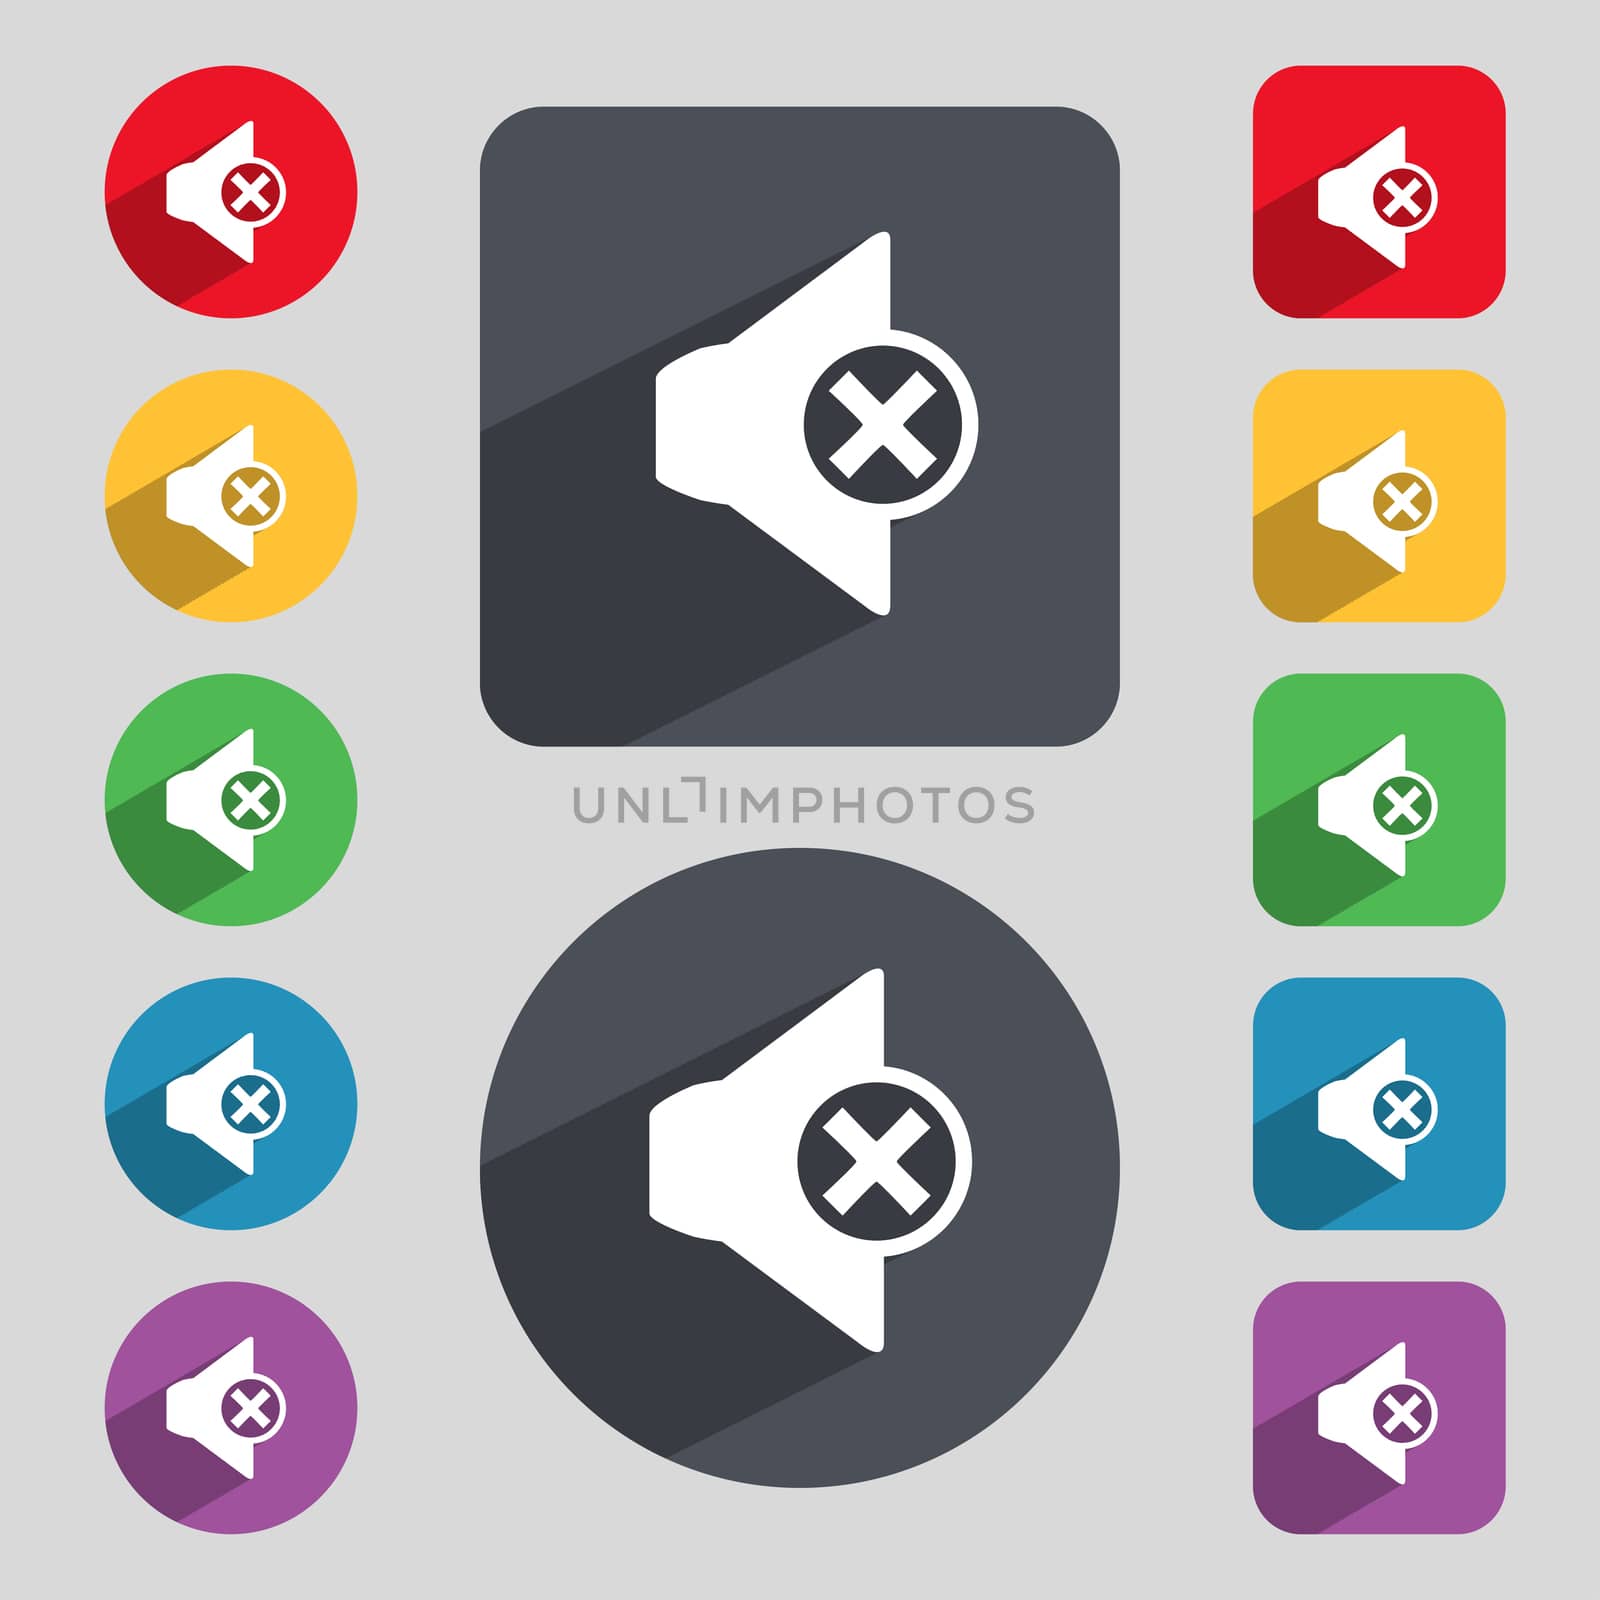 Mute speaker sign icon. Sound symbol. Set of colourful buttons.  by serhii_lohvyniuk